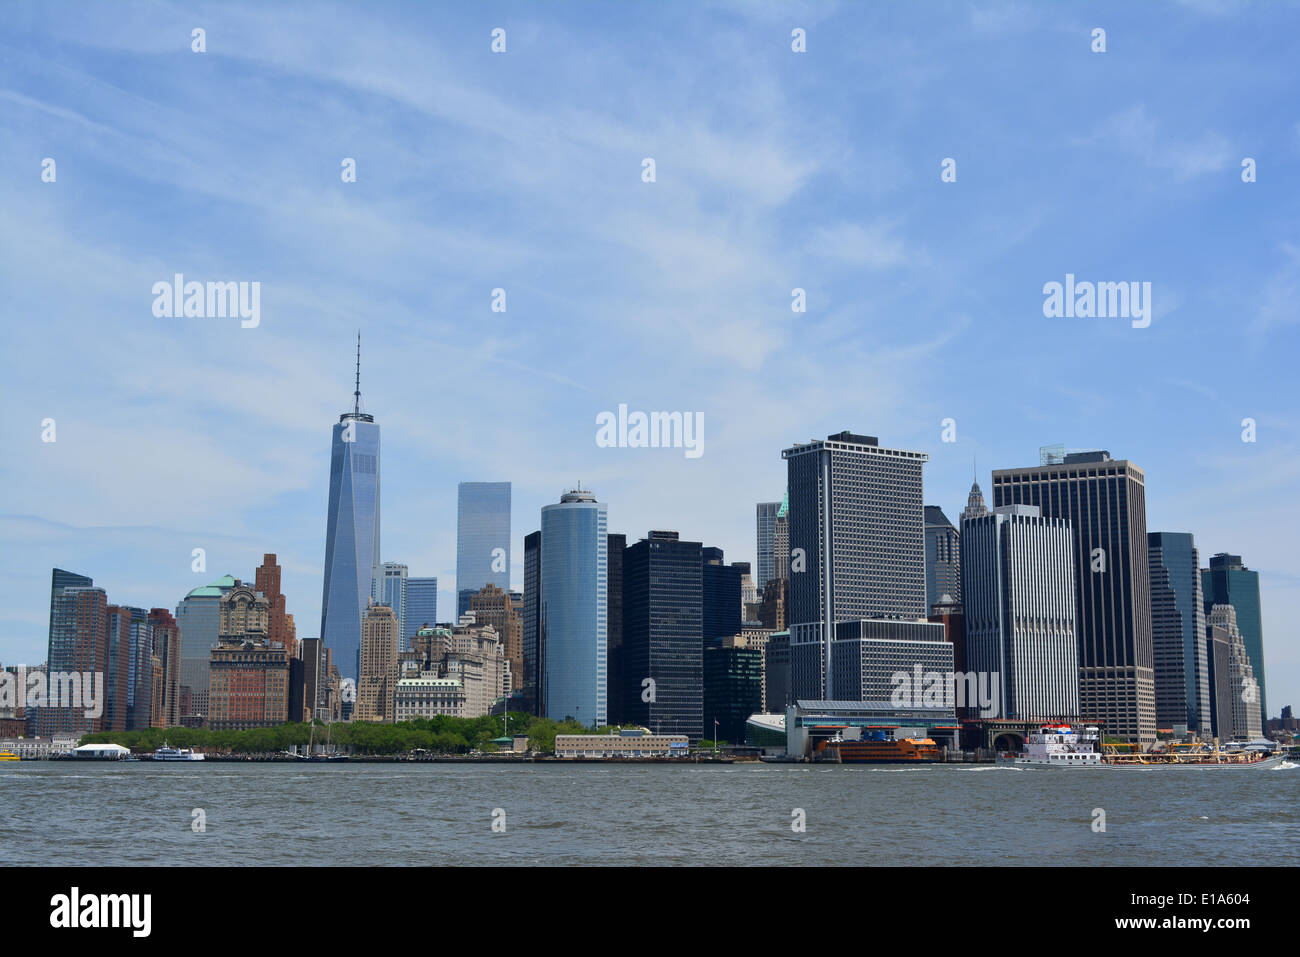 Lower Manhattan as seen from Governors Island in New York Harbor. Stock Photo